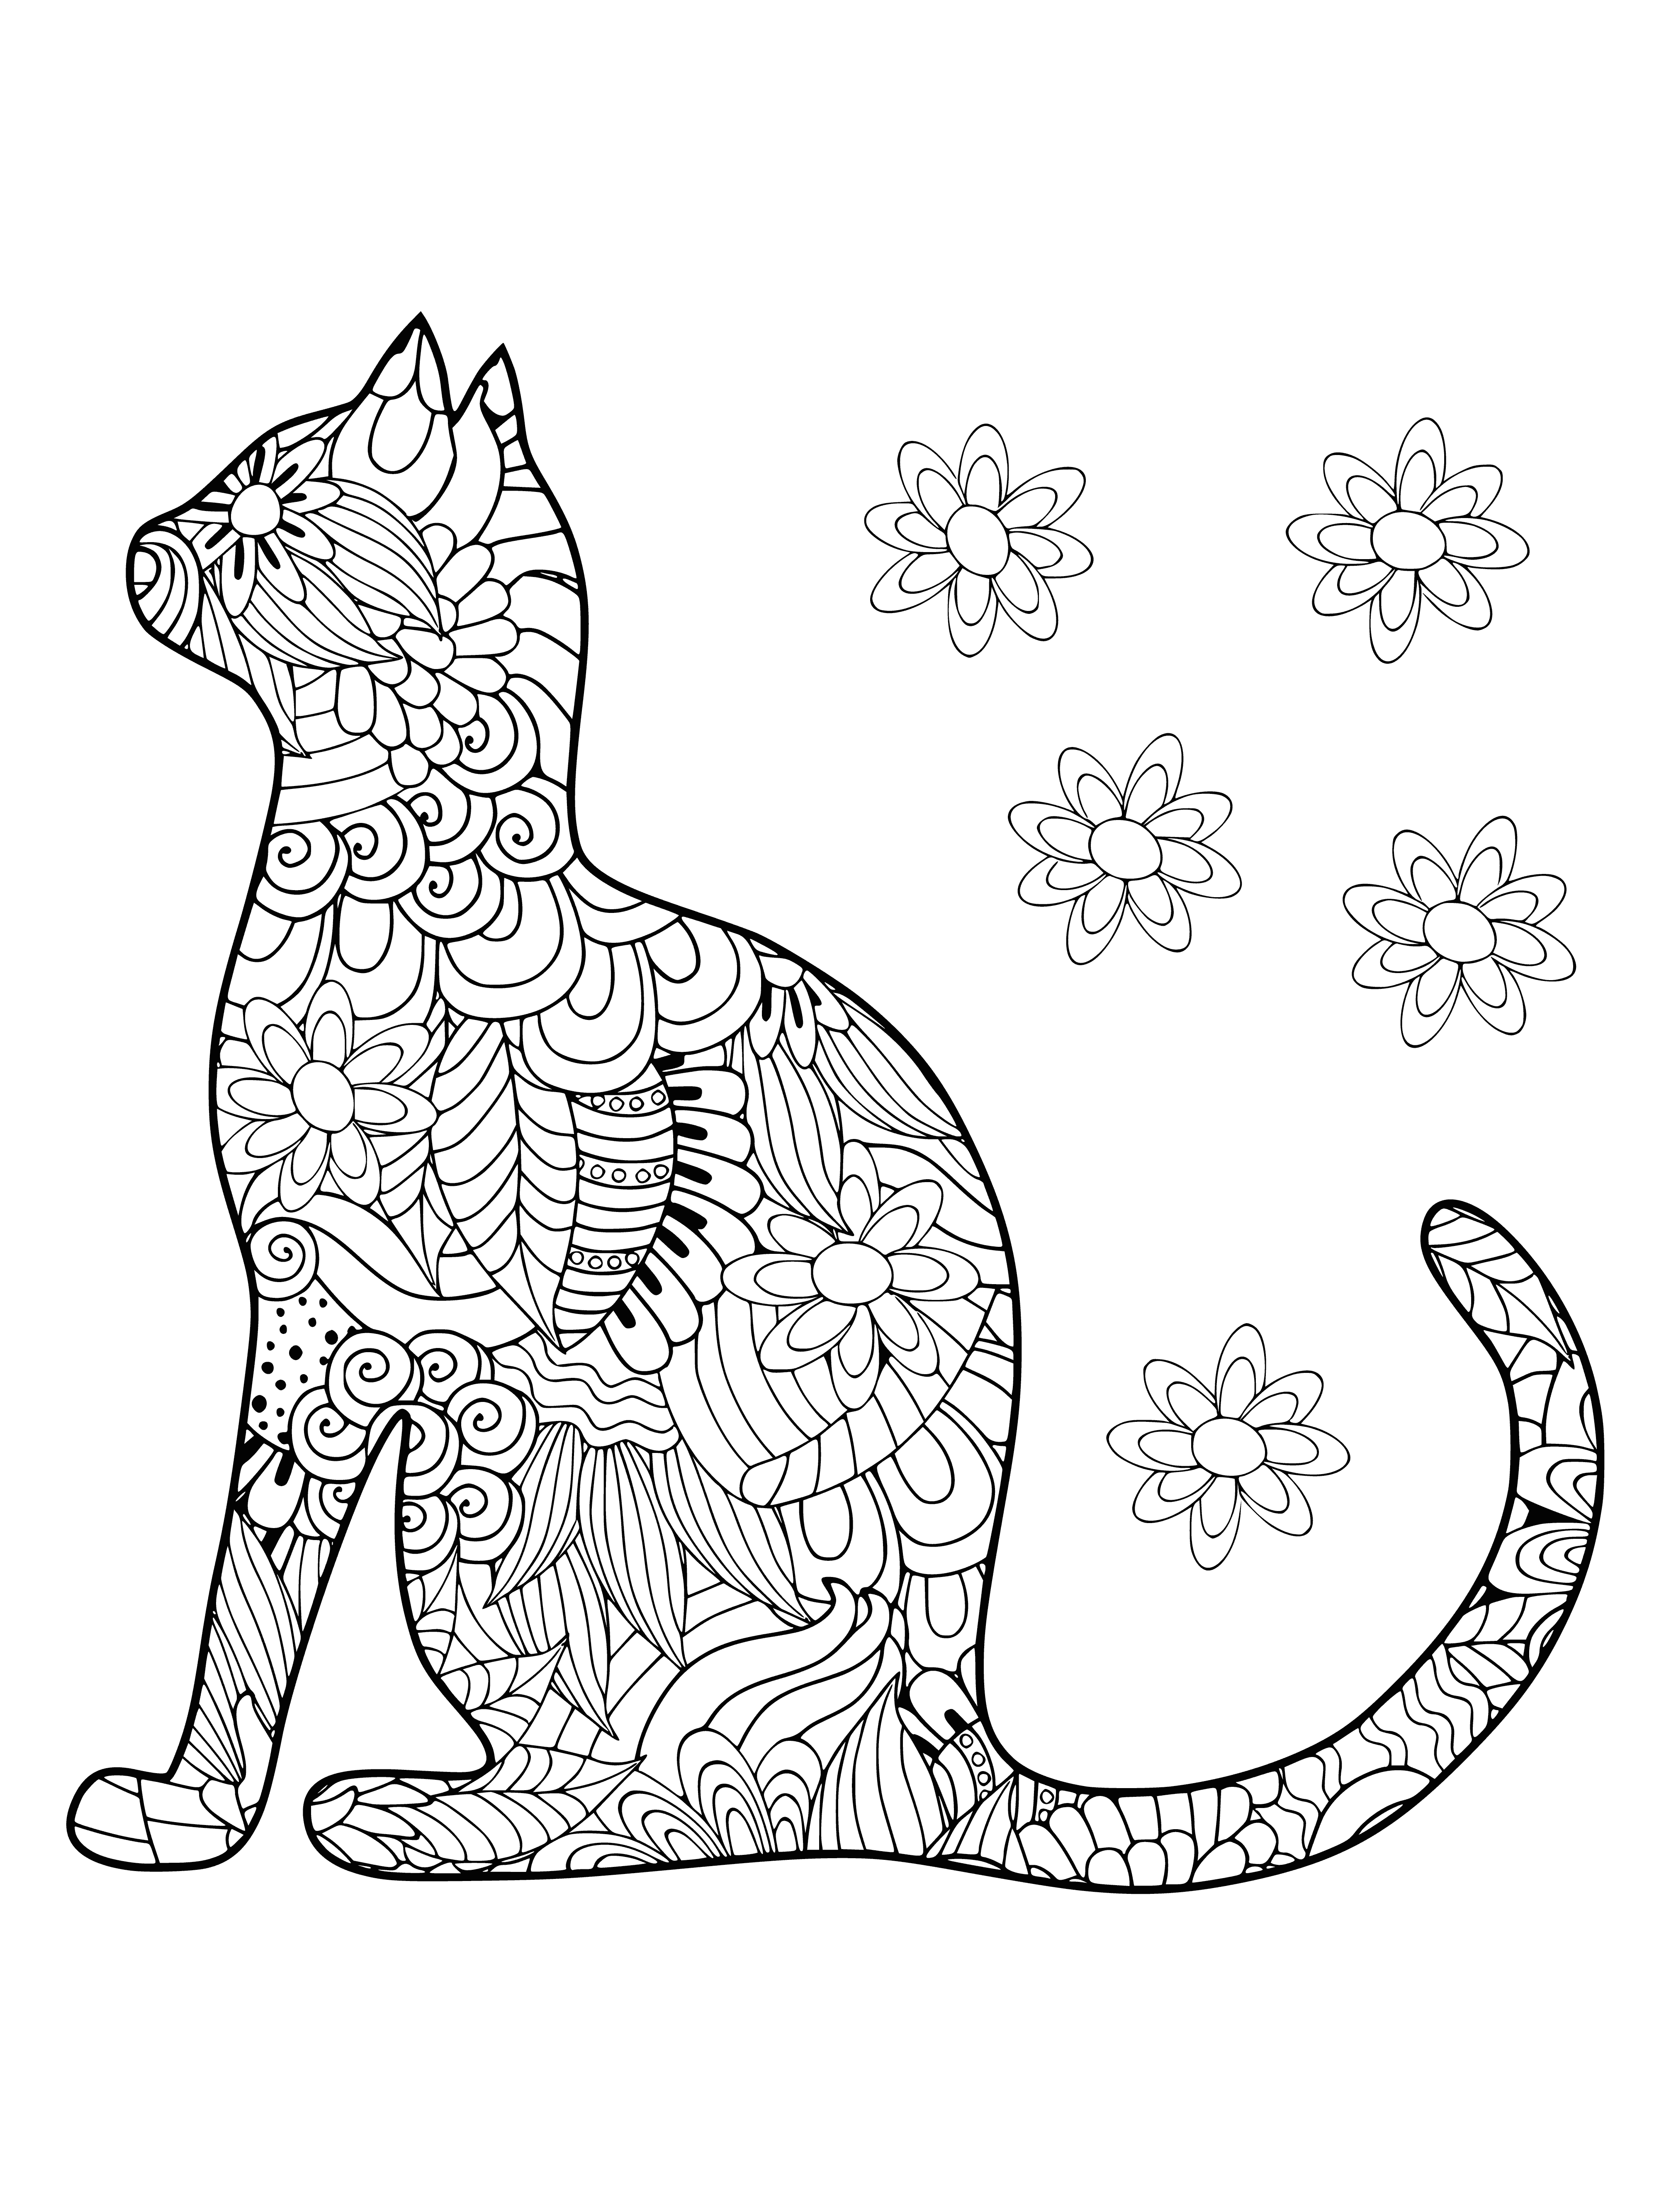 coloring page: Cat silhouette in relaxation pose on white background. No other colors used.